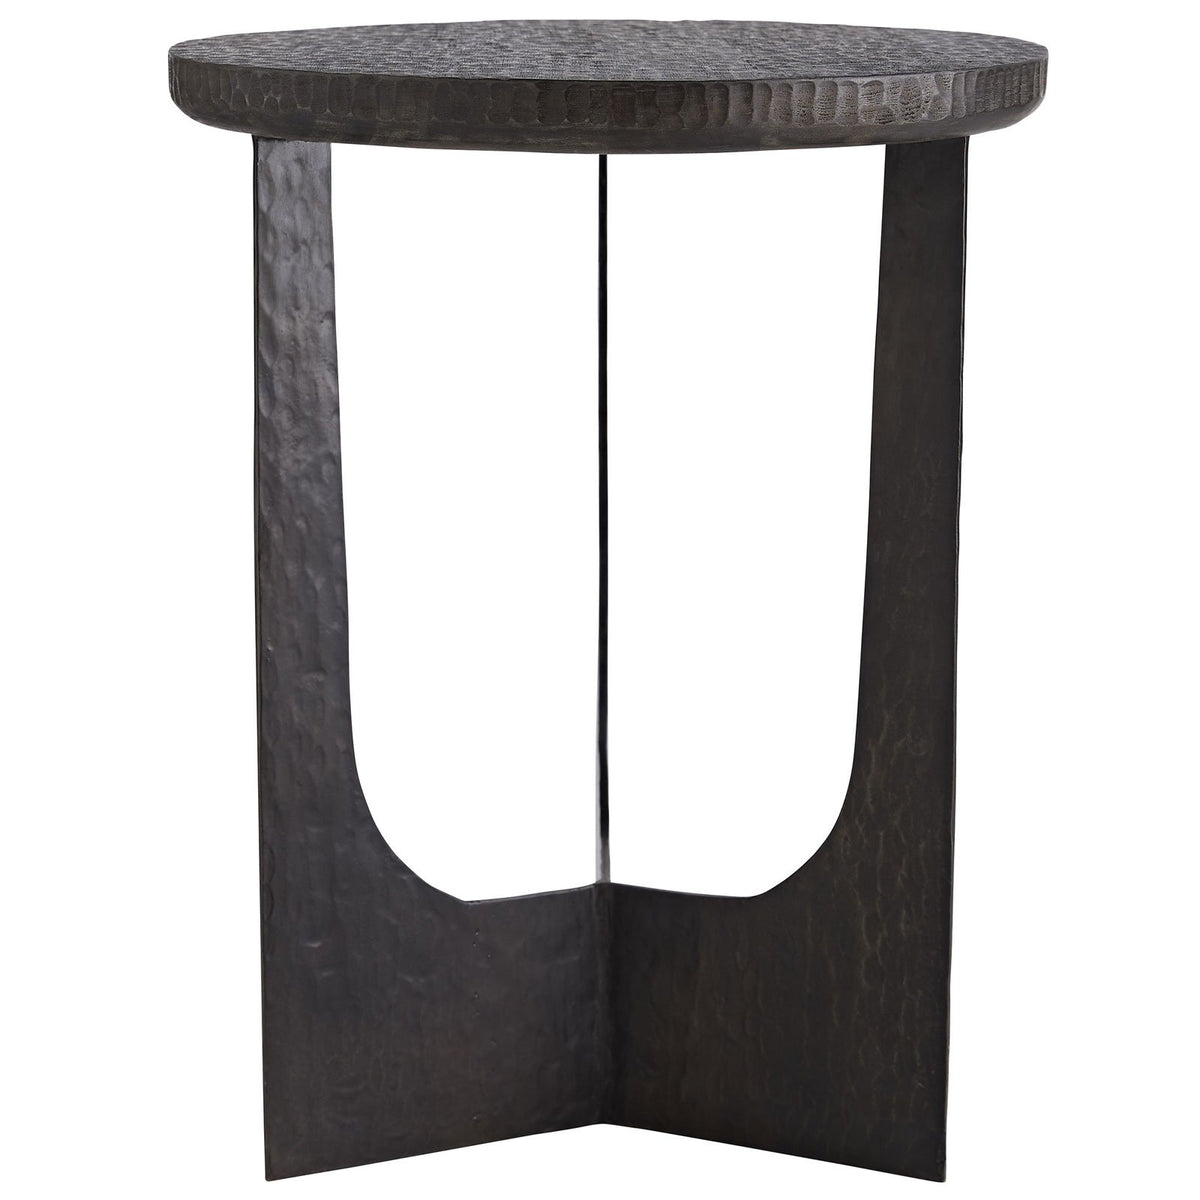 Dustin Accent Table